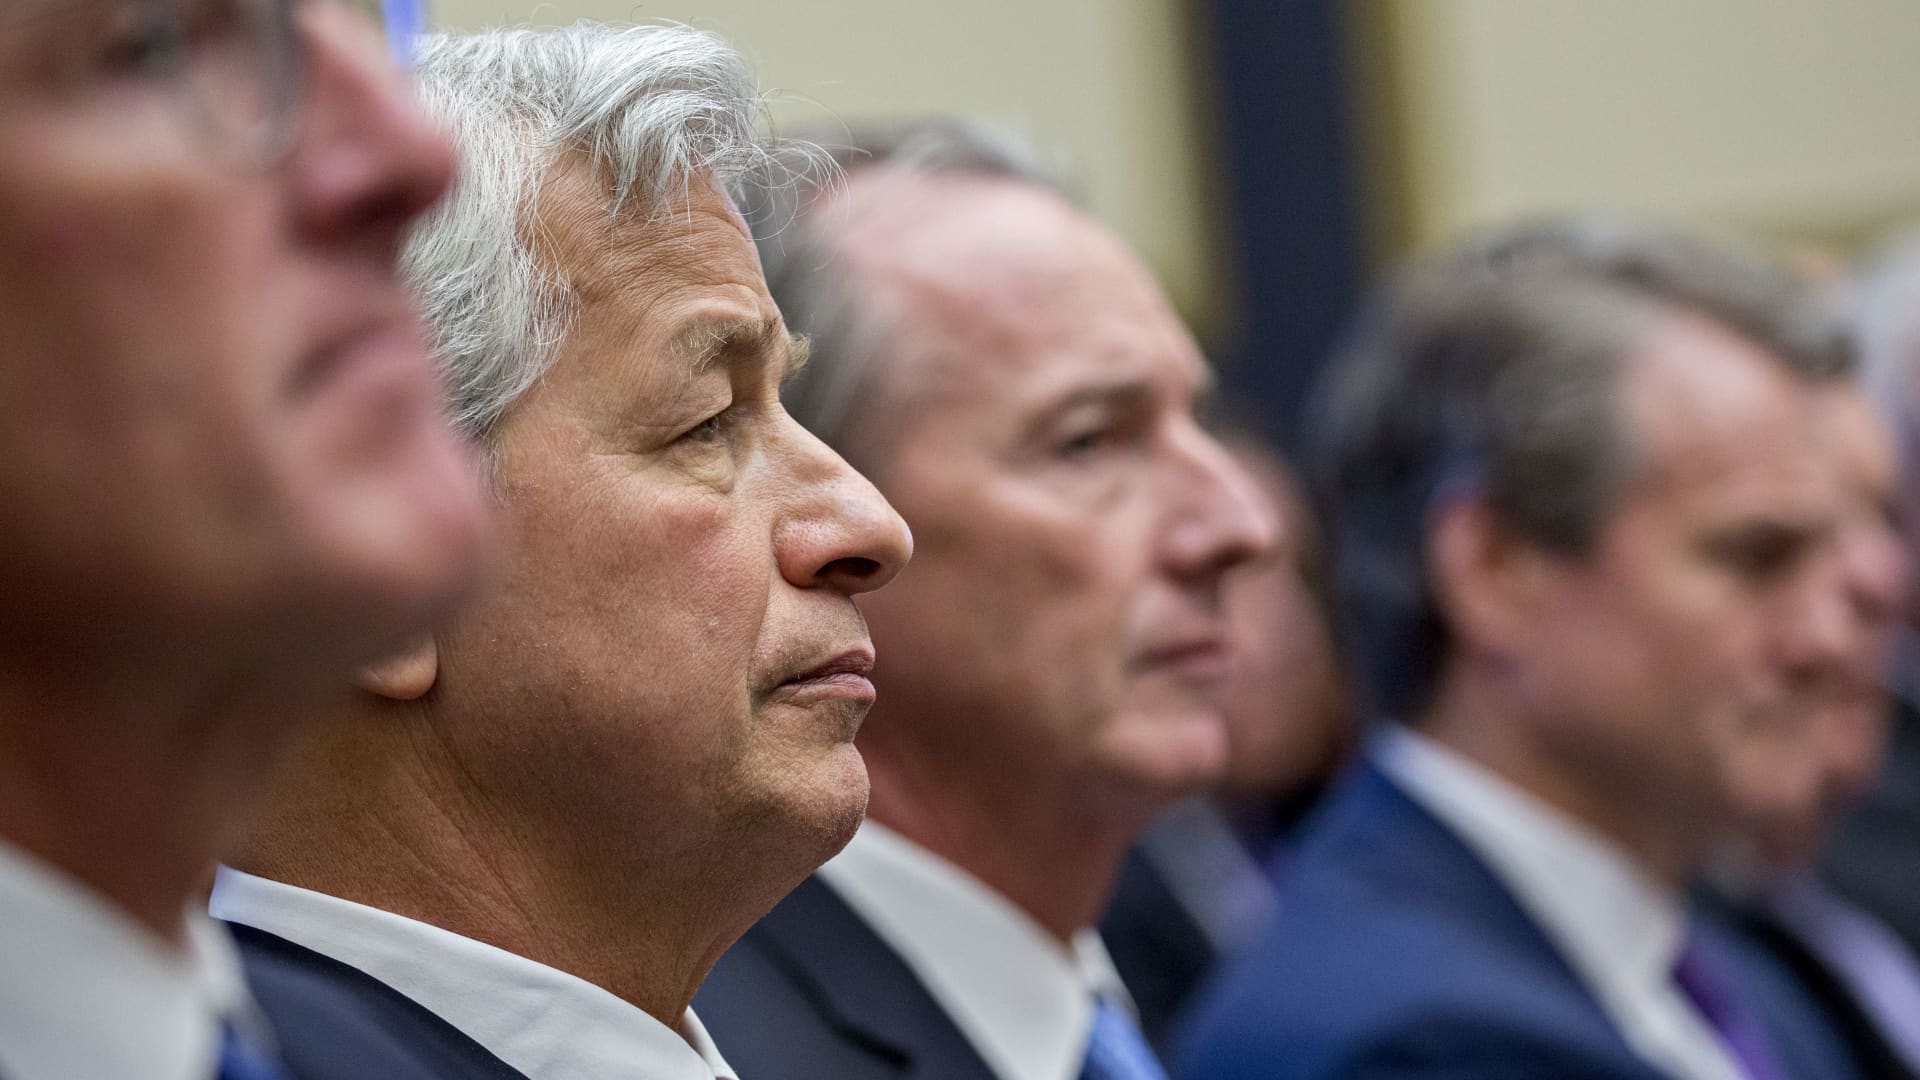 Jamie Dimon, chief executive officer of JPMorgan Chase & Co., second left, listens during a House Financial Services Committee hearing in Washington, D.C., U.S., on Wednesday, April 10, 2019.